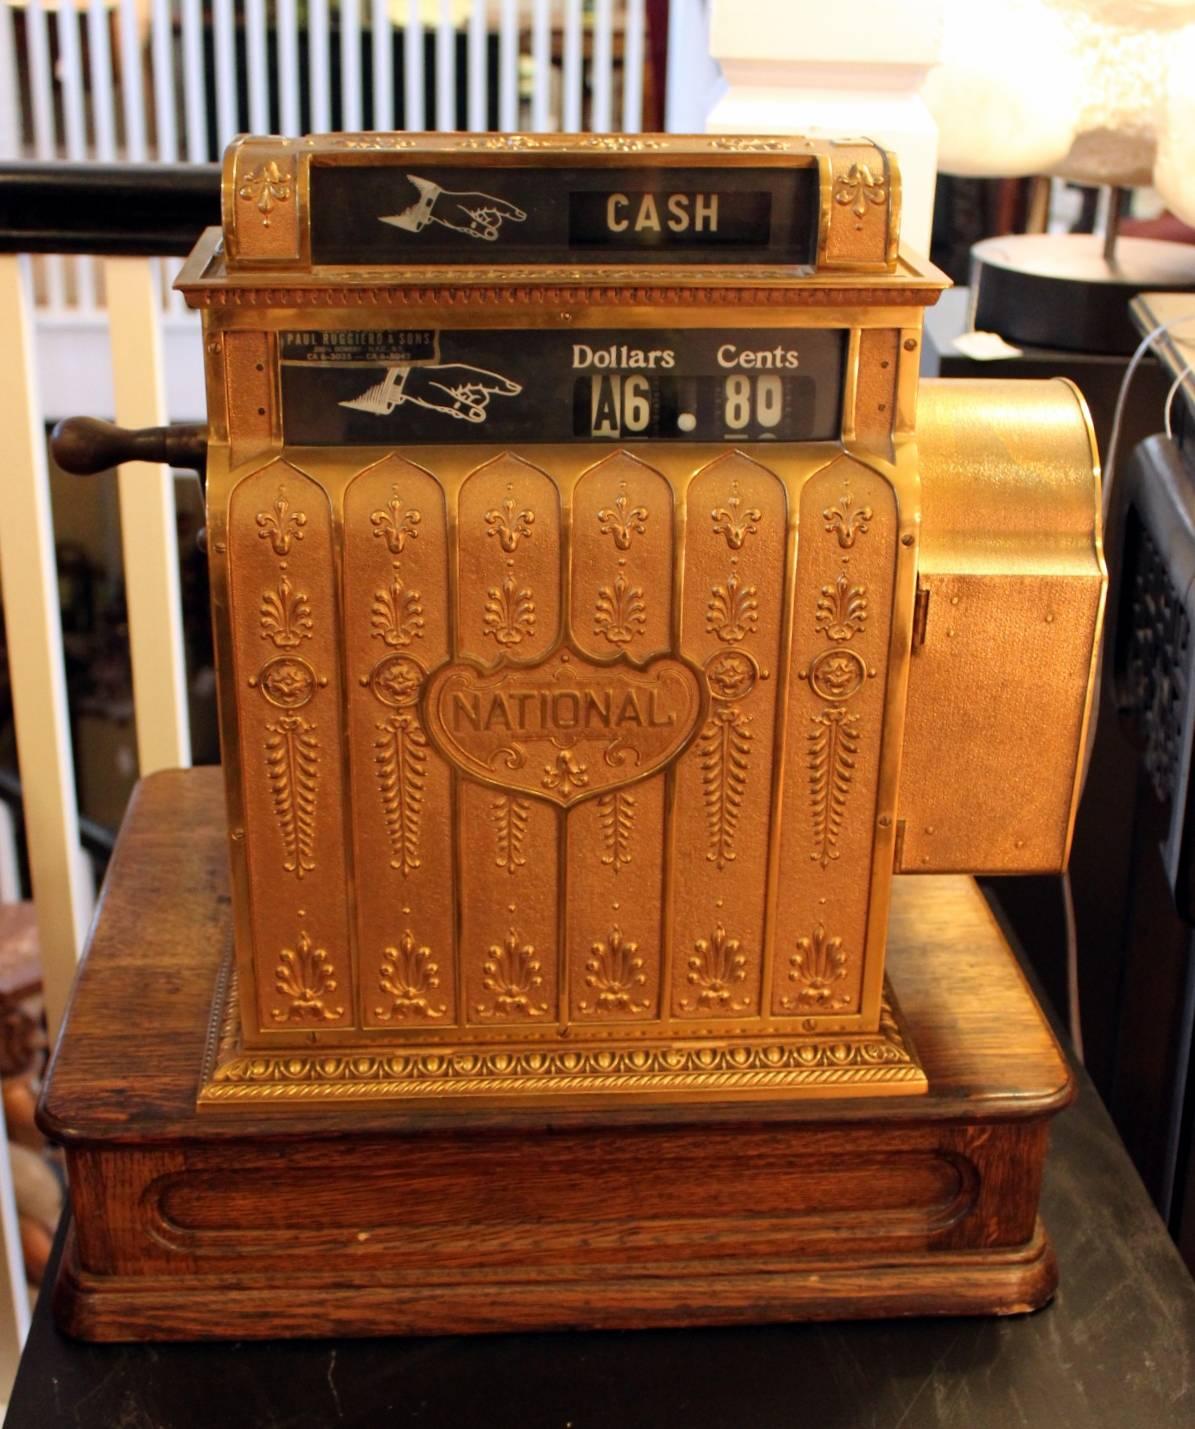 North American Antique Brass Cash Register by National Cash Register Company, 1910-1915